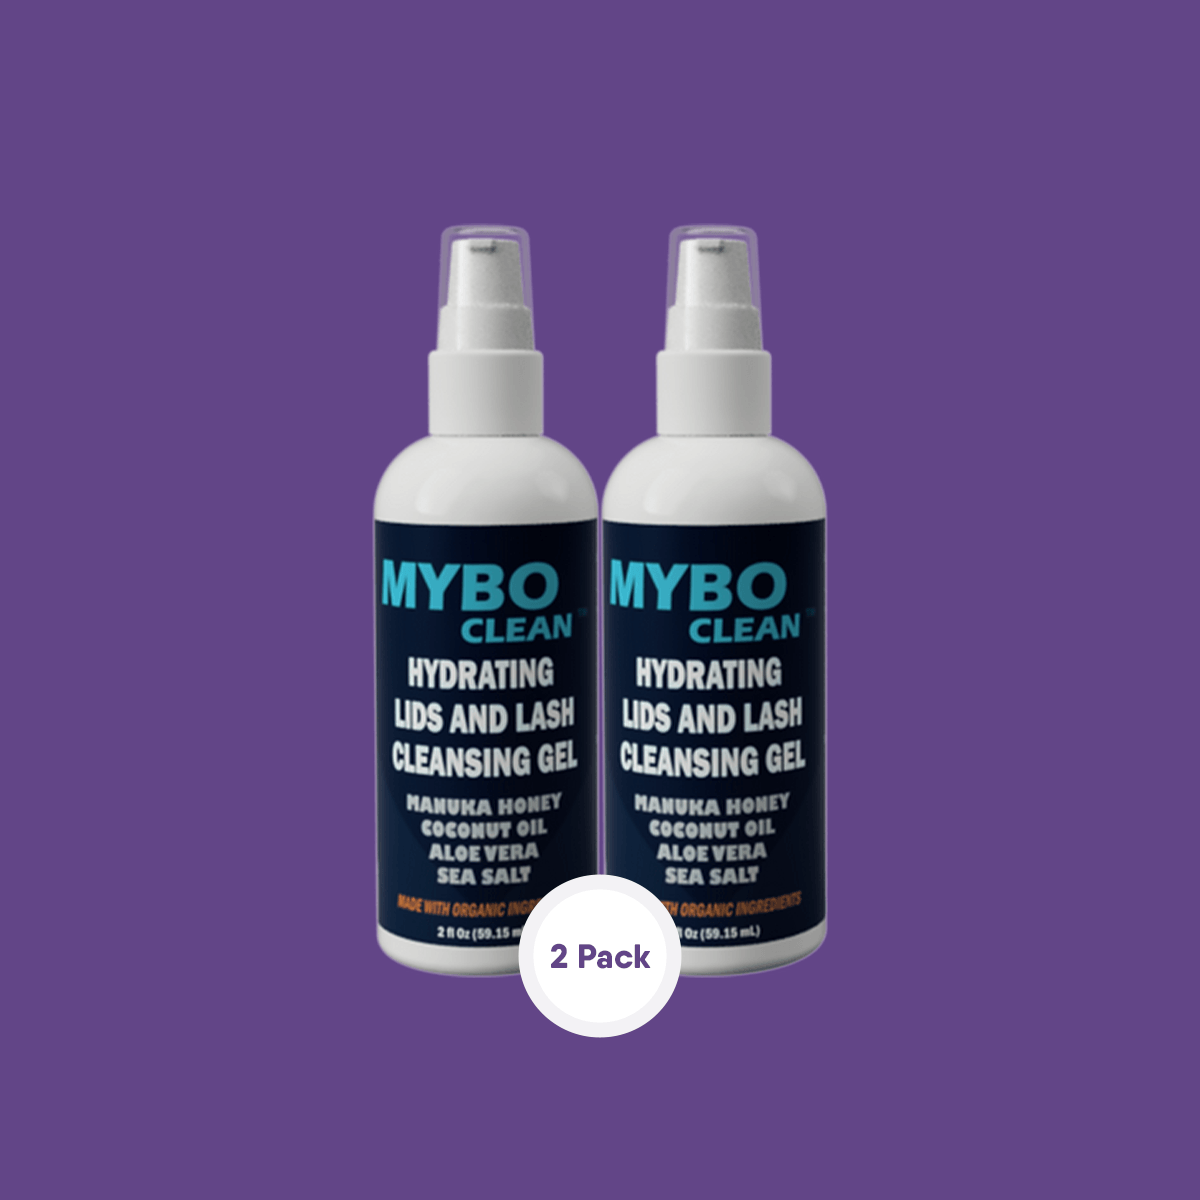 MyboClean Hydrating Lids and Lash Cleansing Gel (2 pc) - 1 Year Supply - DryEye Rescue Store